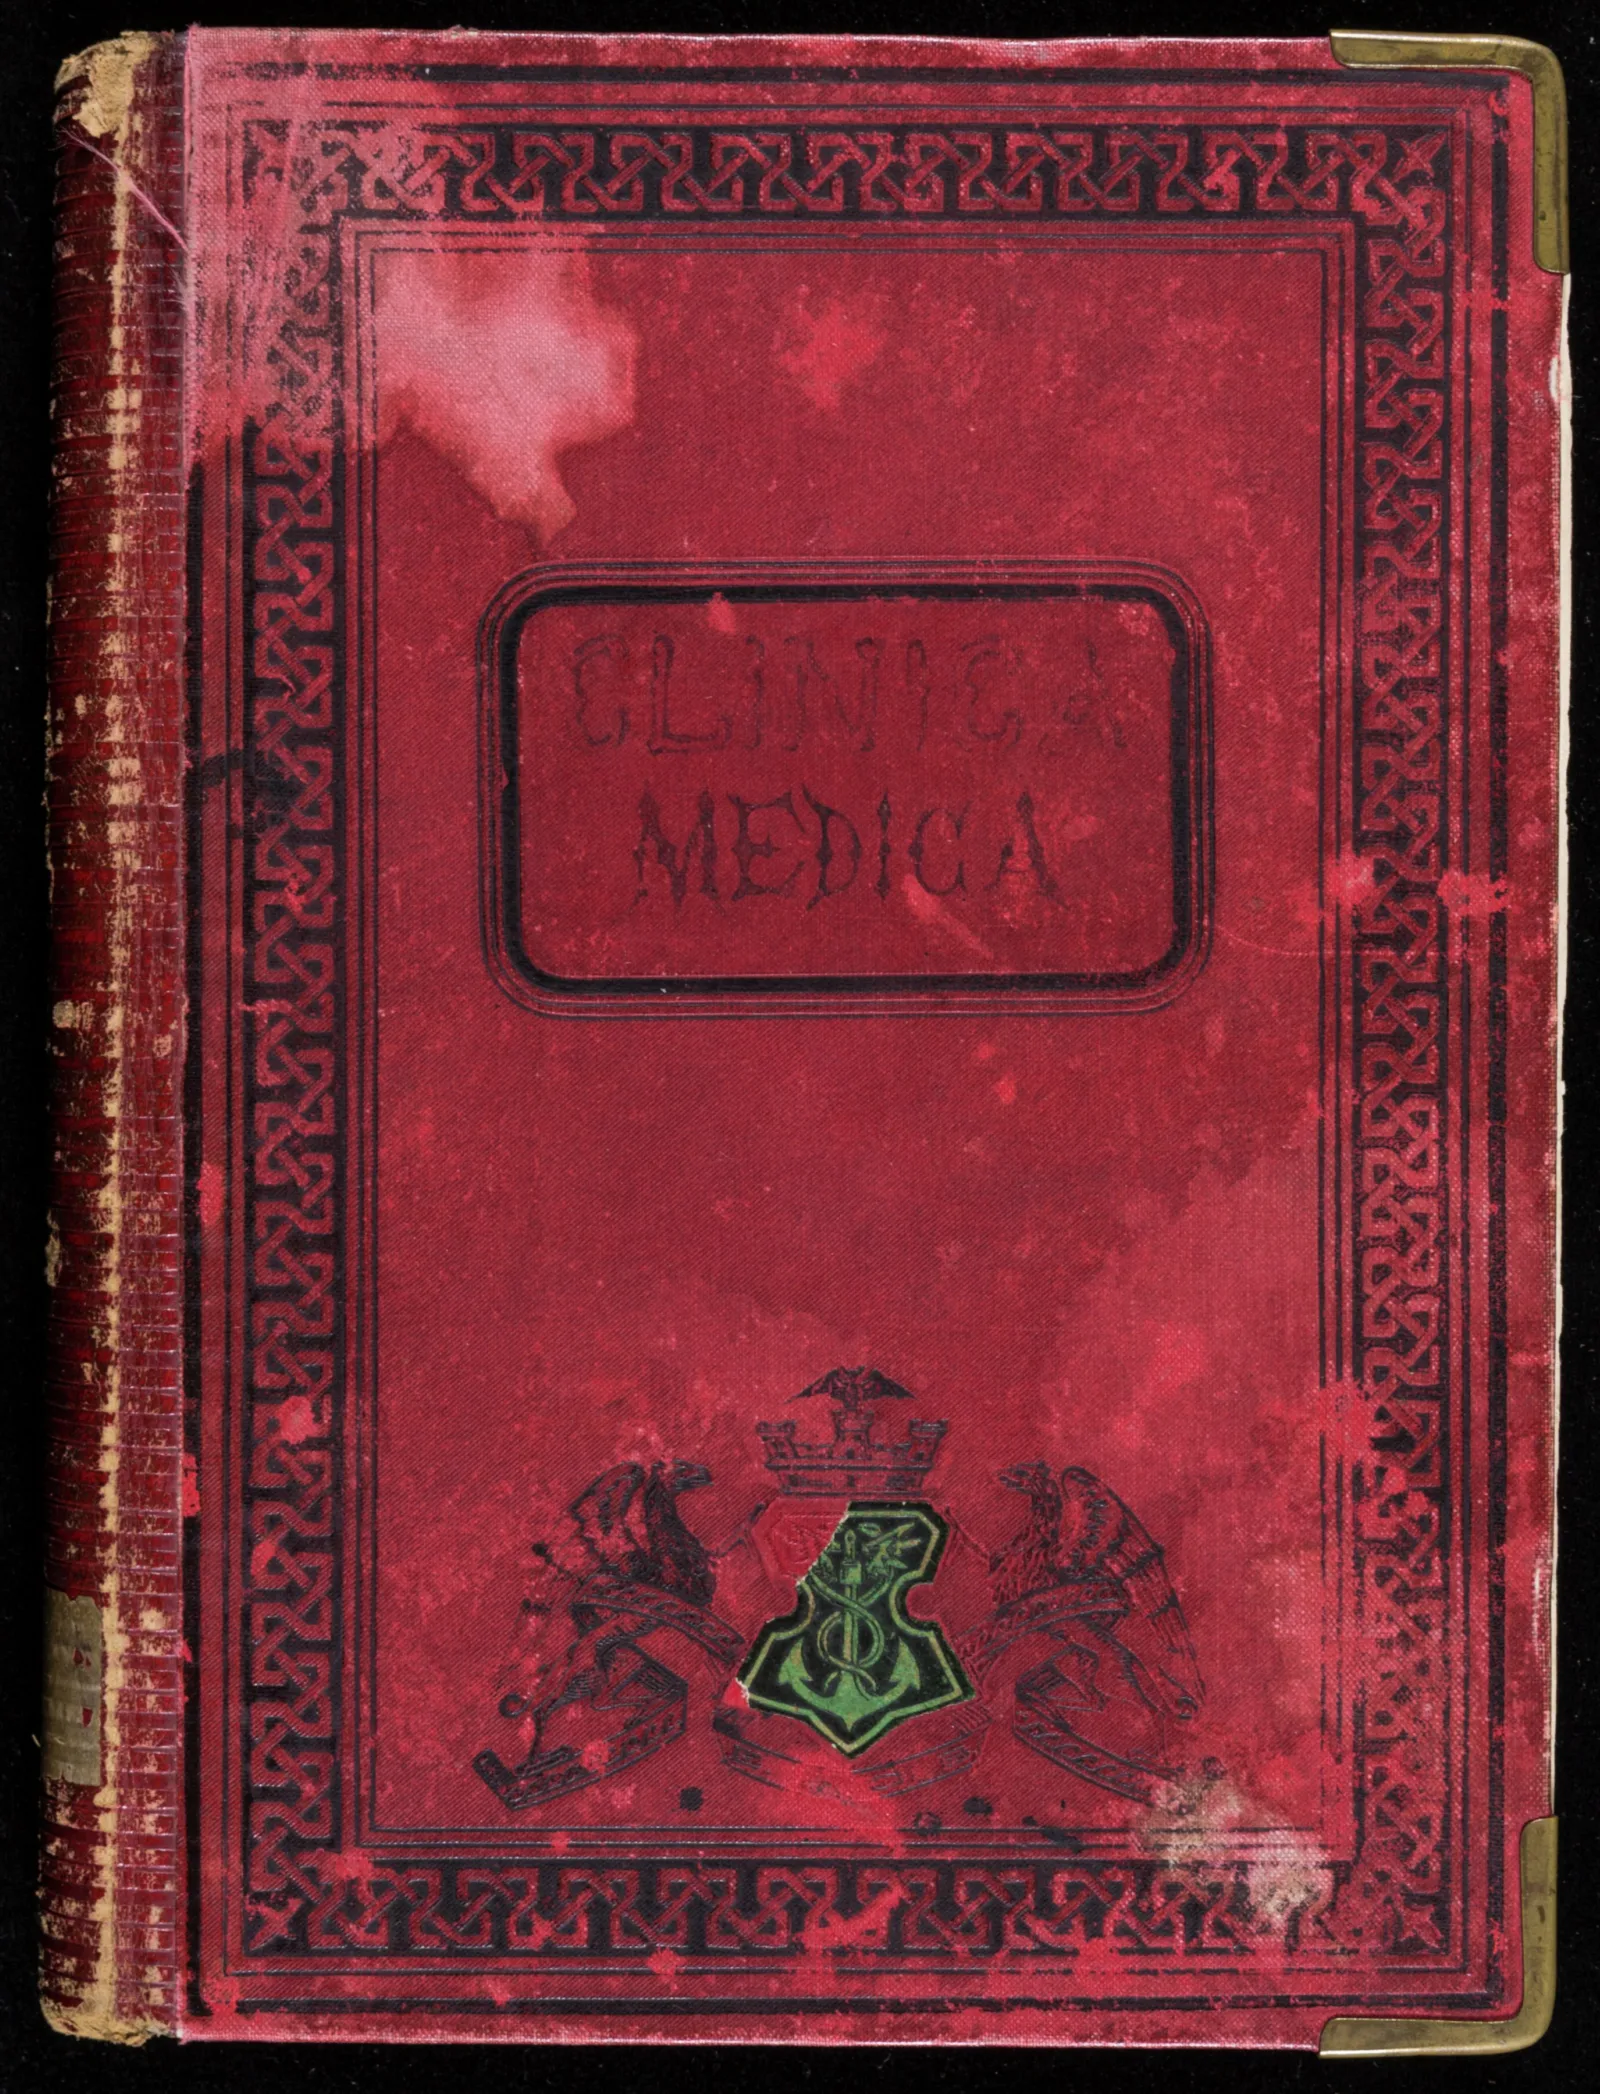 Front cover of Clínica Médica. The cover is red with black ornamental decorations along the border. The text "Clinica Medica" is printed in the center.